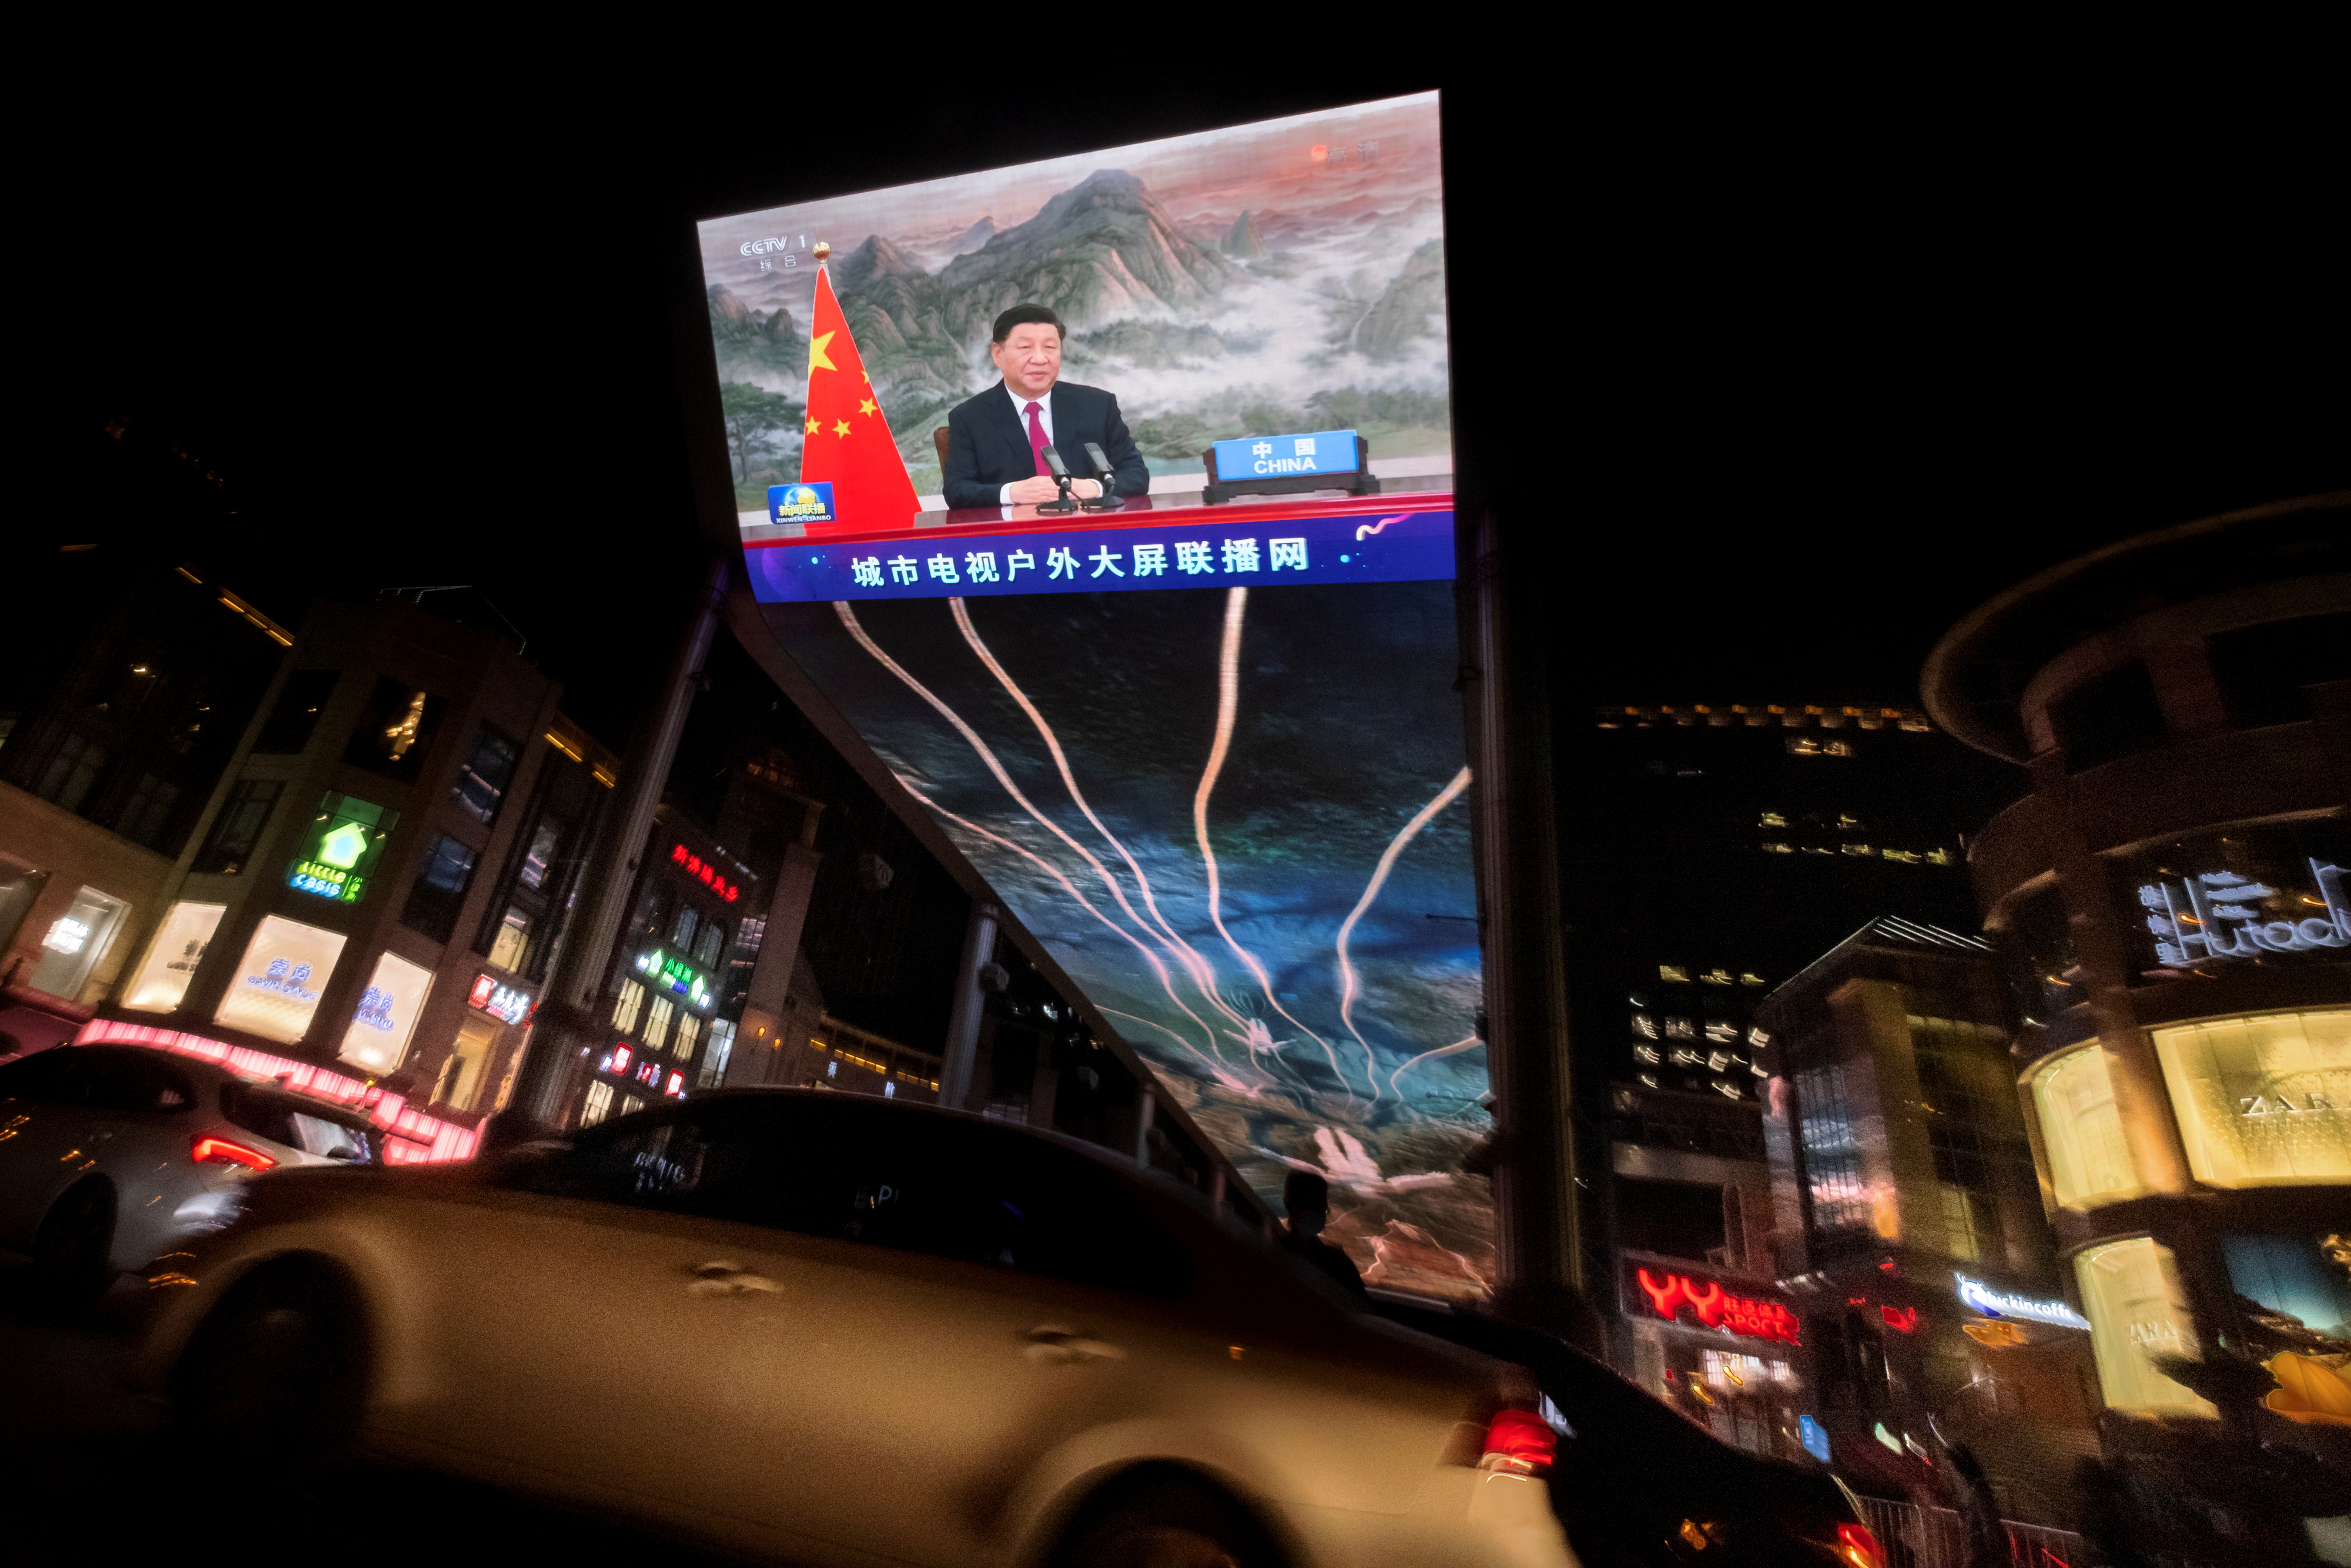 A screen displays a CCTV state media news broadcast showing Chinese President Xi Jinping addressing world leaders at the G20 meeting in Rome via video link at a shopping mall in Beijing